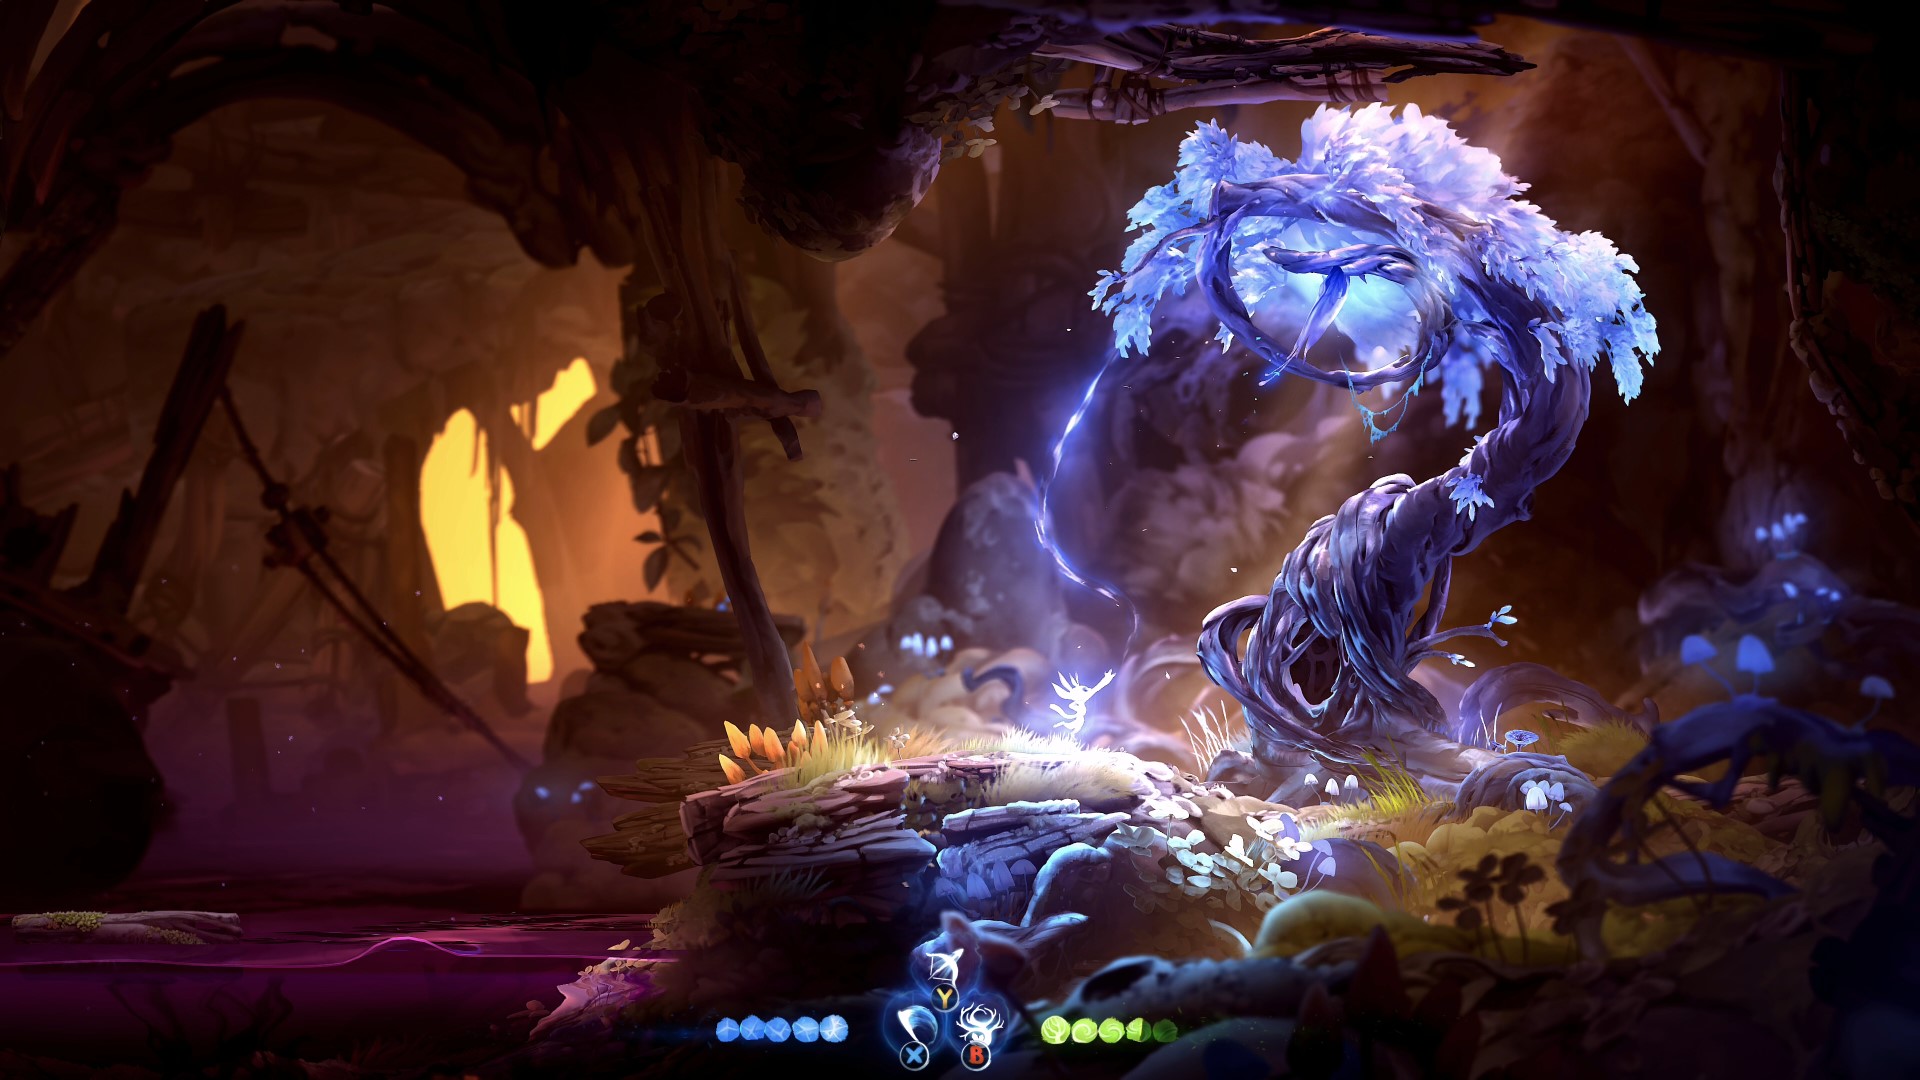 ori and the will of the wisps xbox